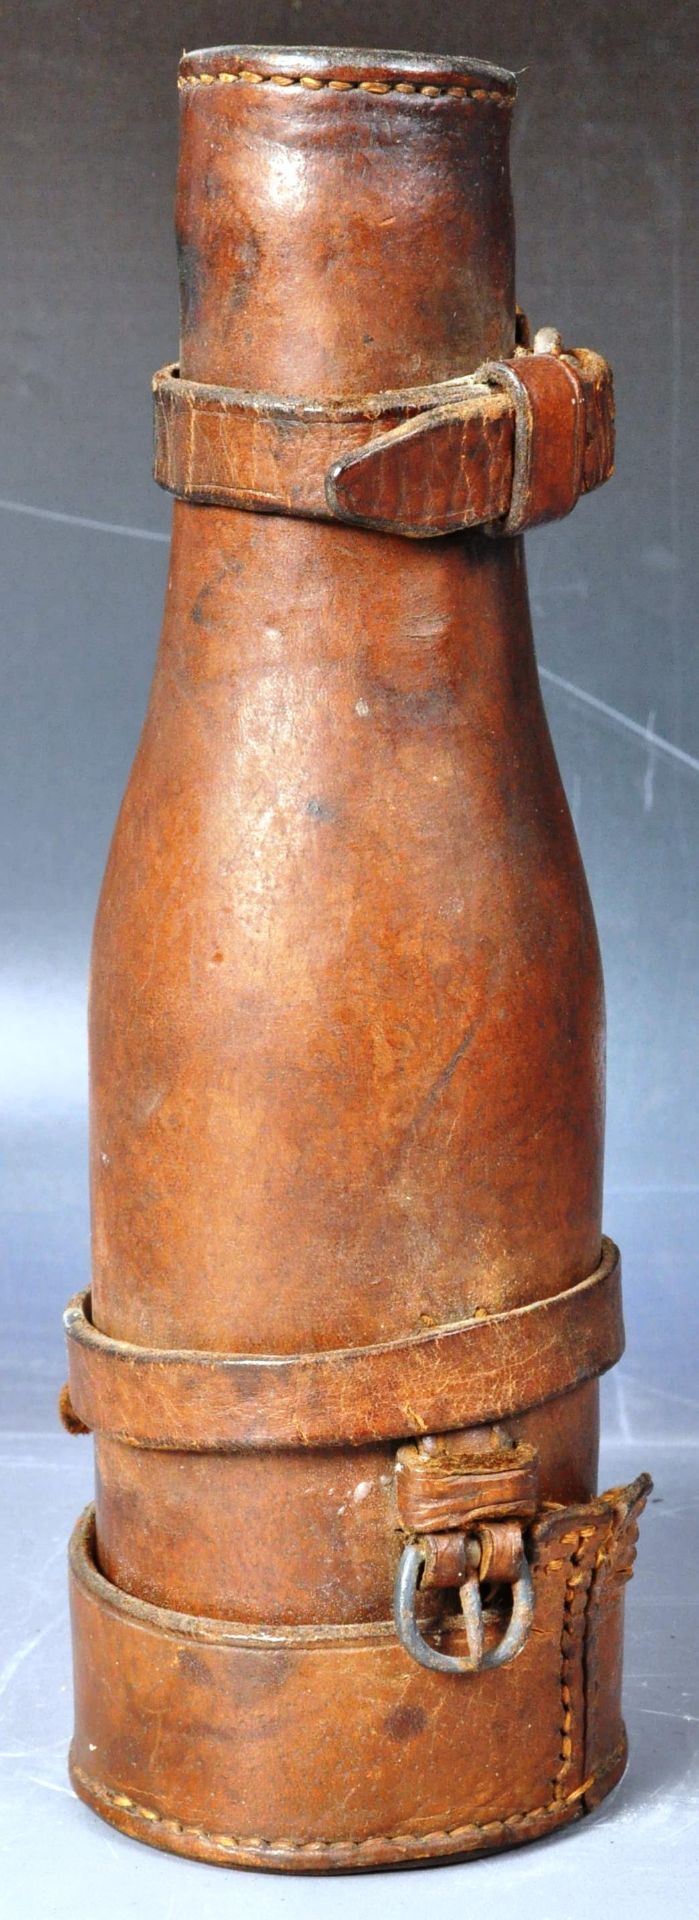 EARLY 20TH CENTURY LEATHER HUNTING FLASK - Image 7 of 8